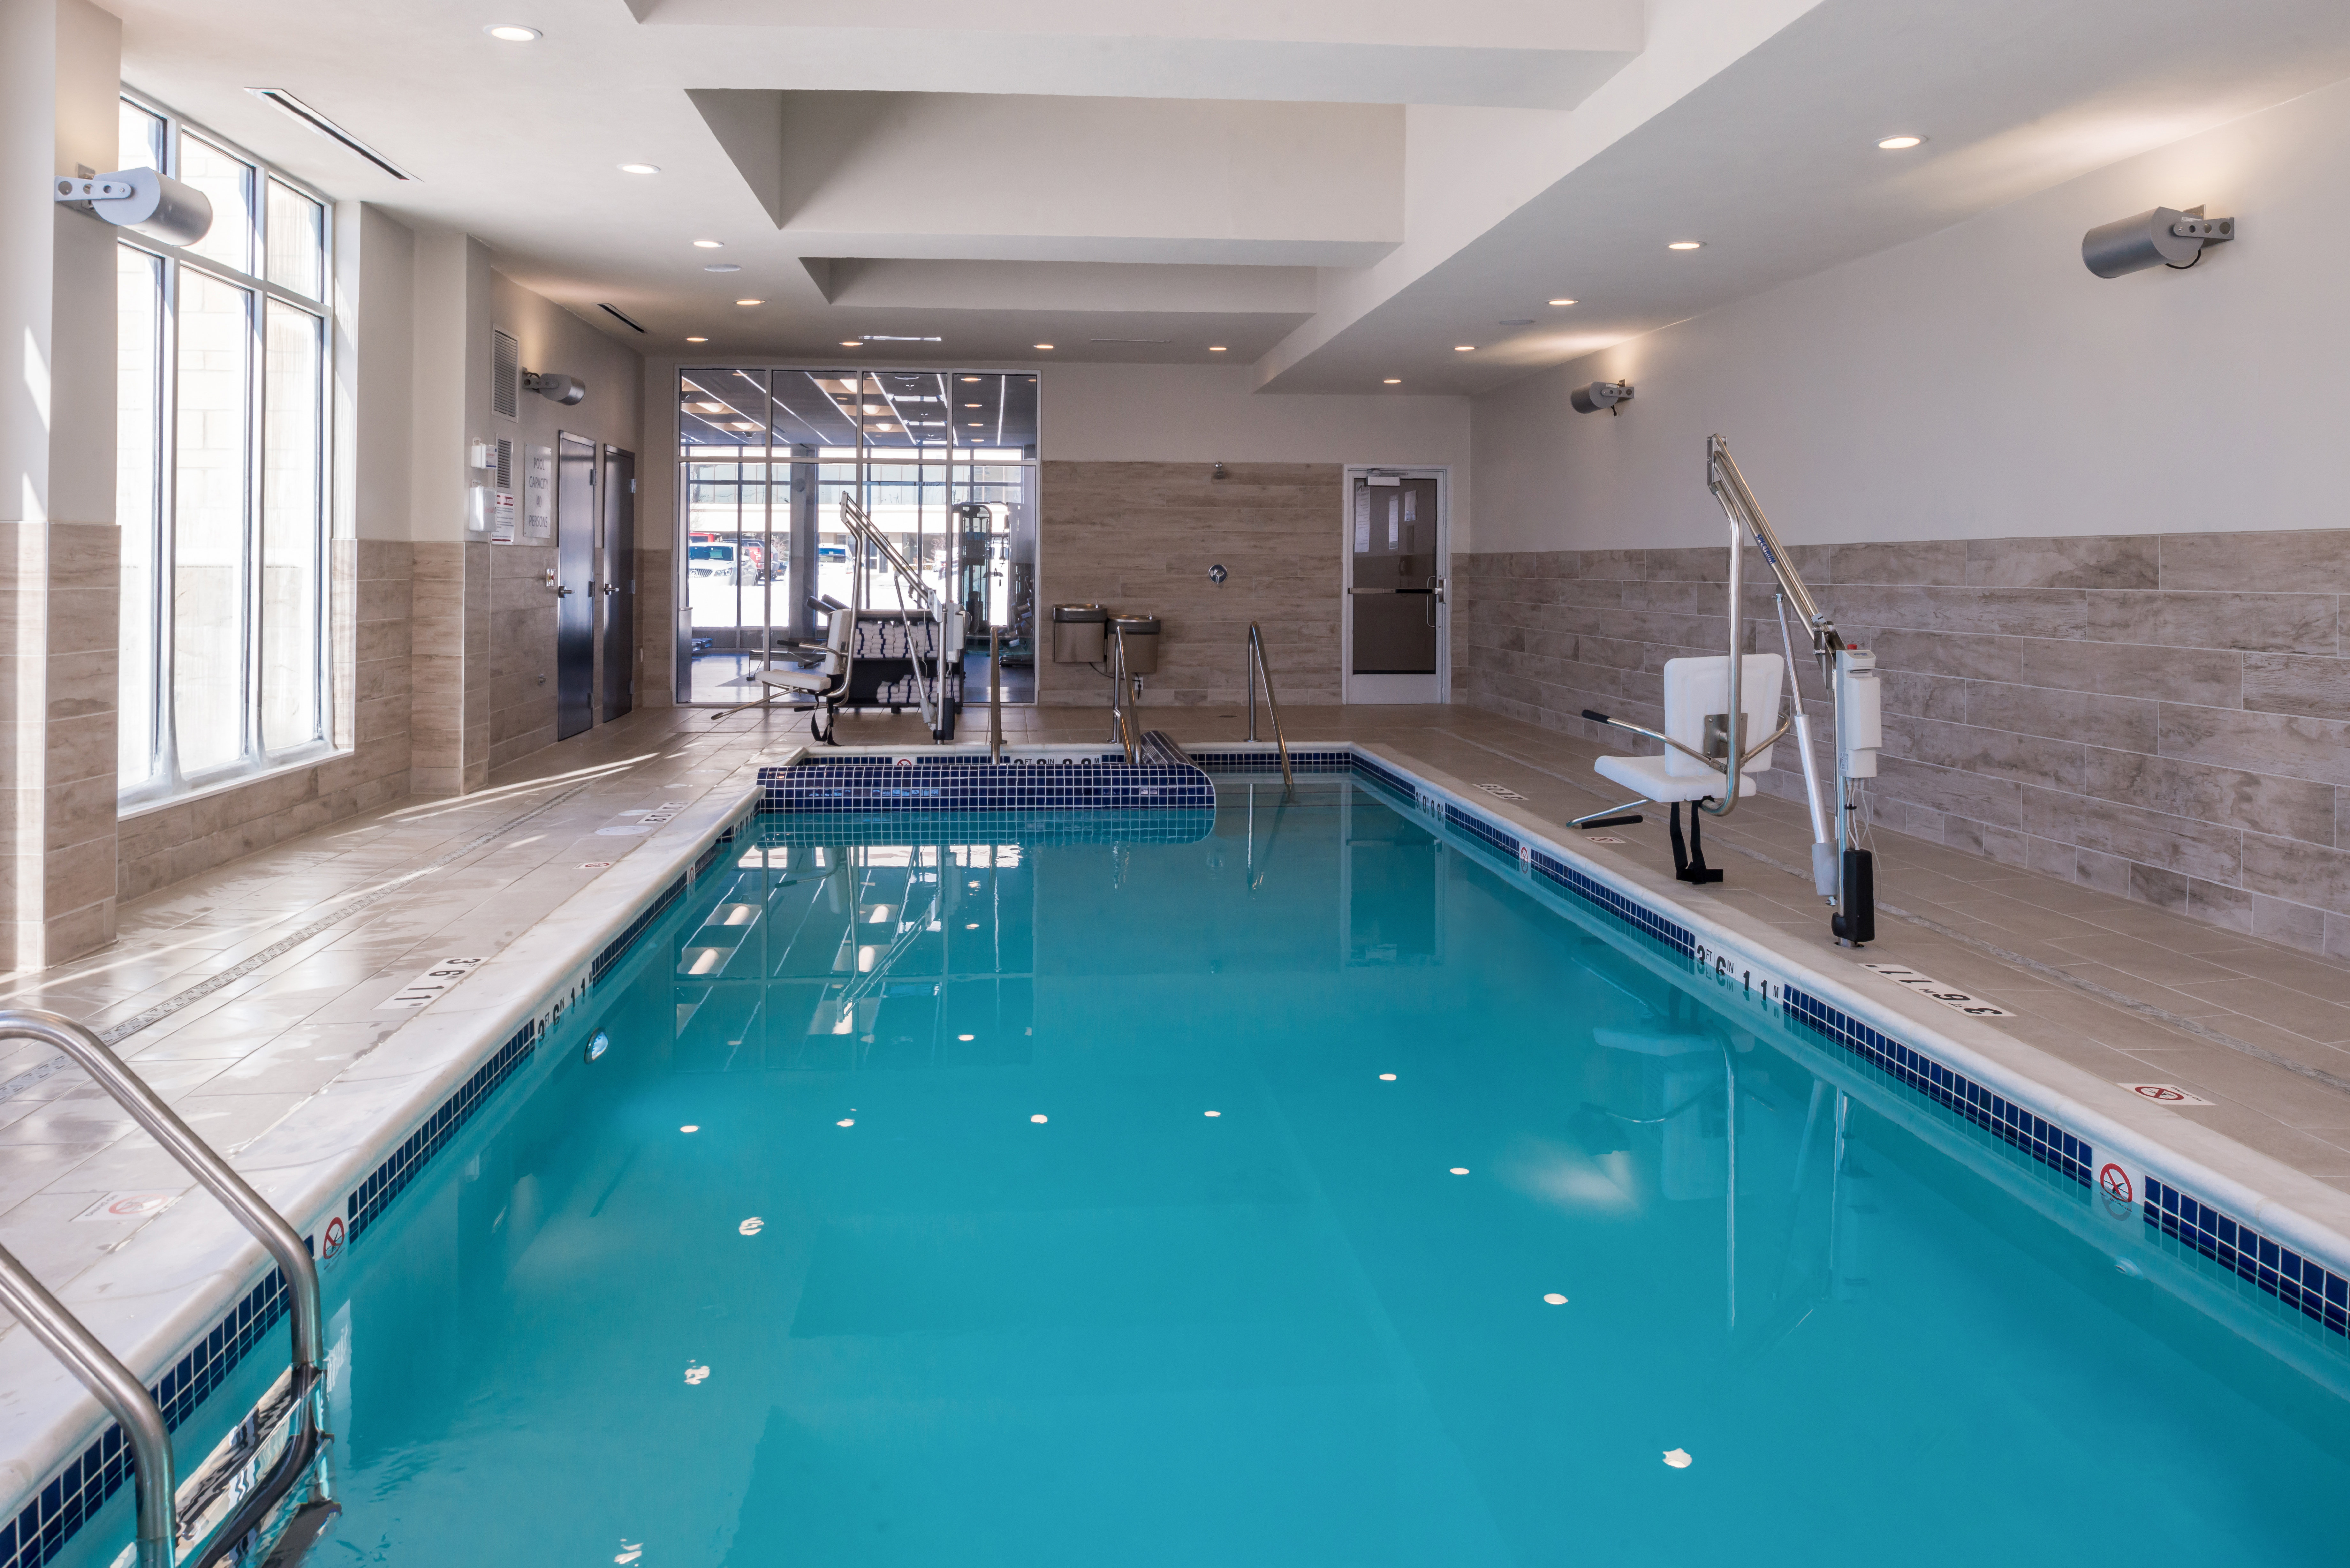 Stay refreshed in our beautiful indoor pool and spa.